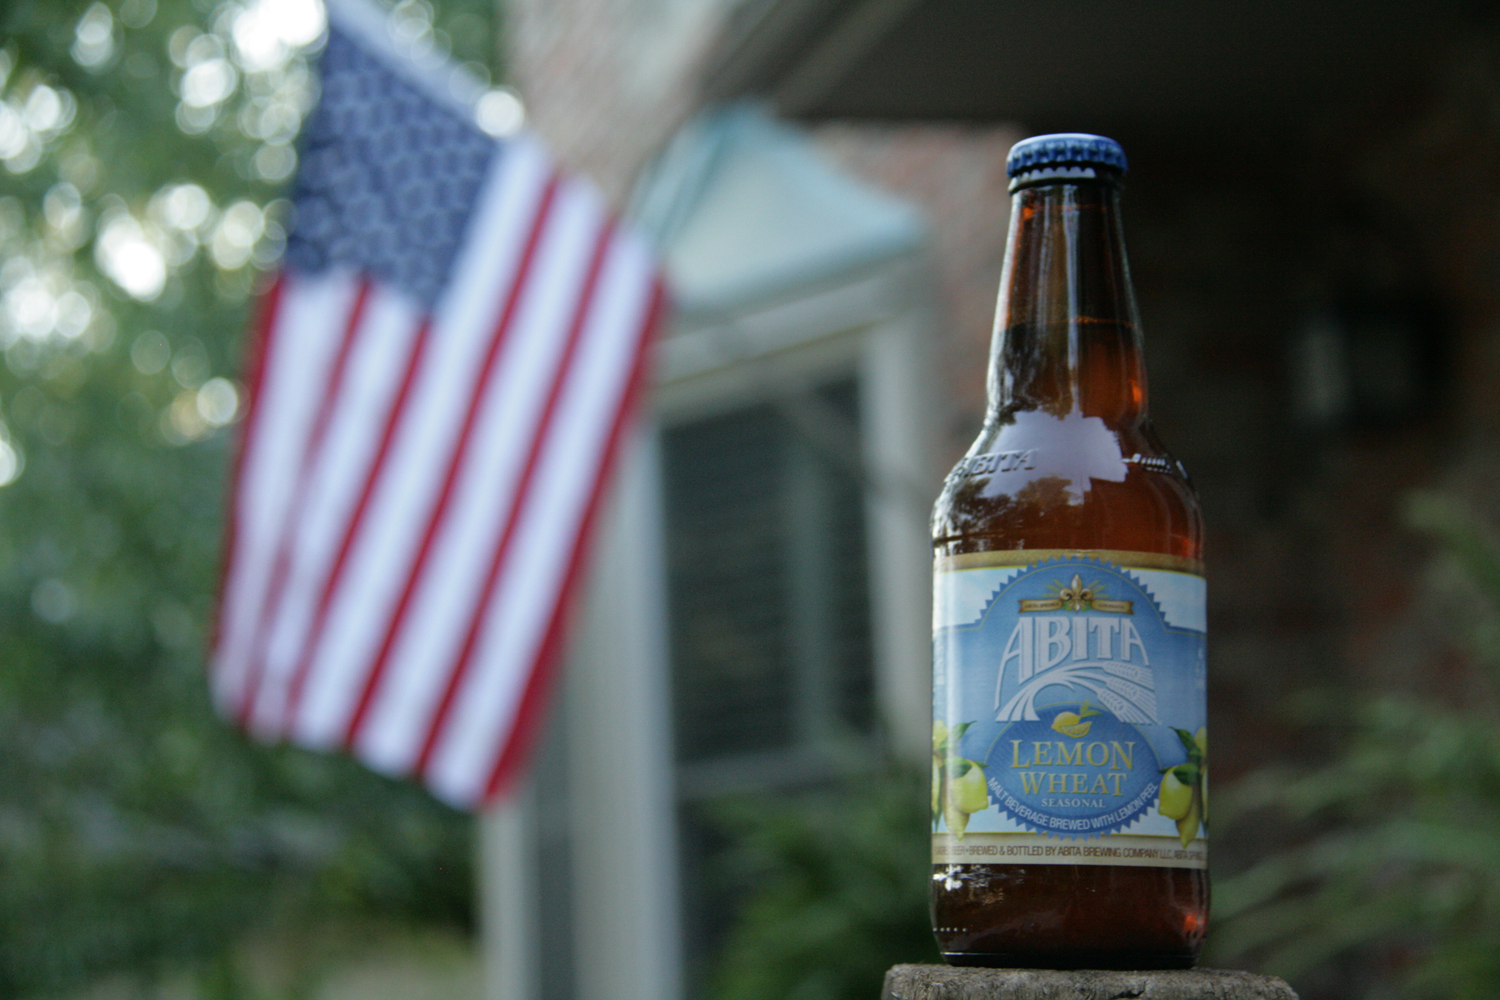 Abita Brewing has crafted the perfect summer lemon wheat.